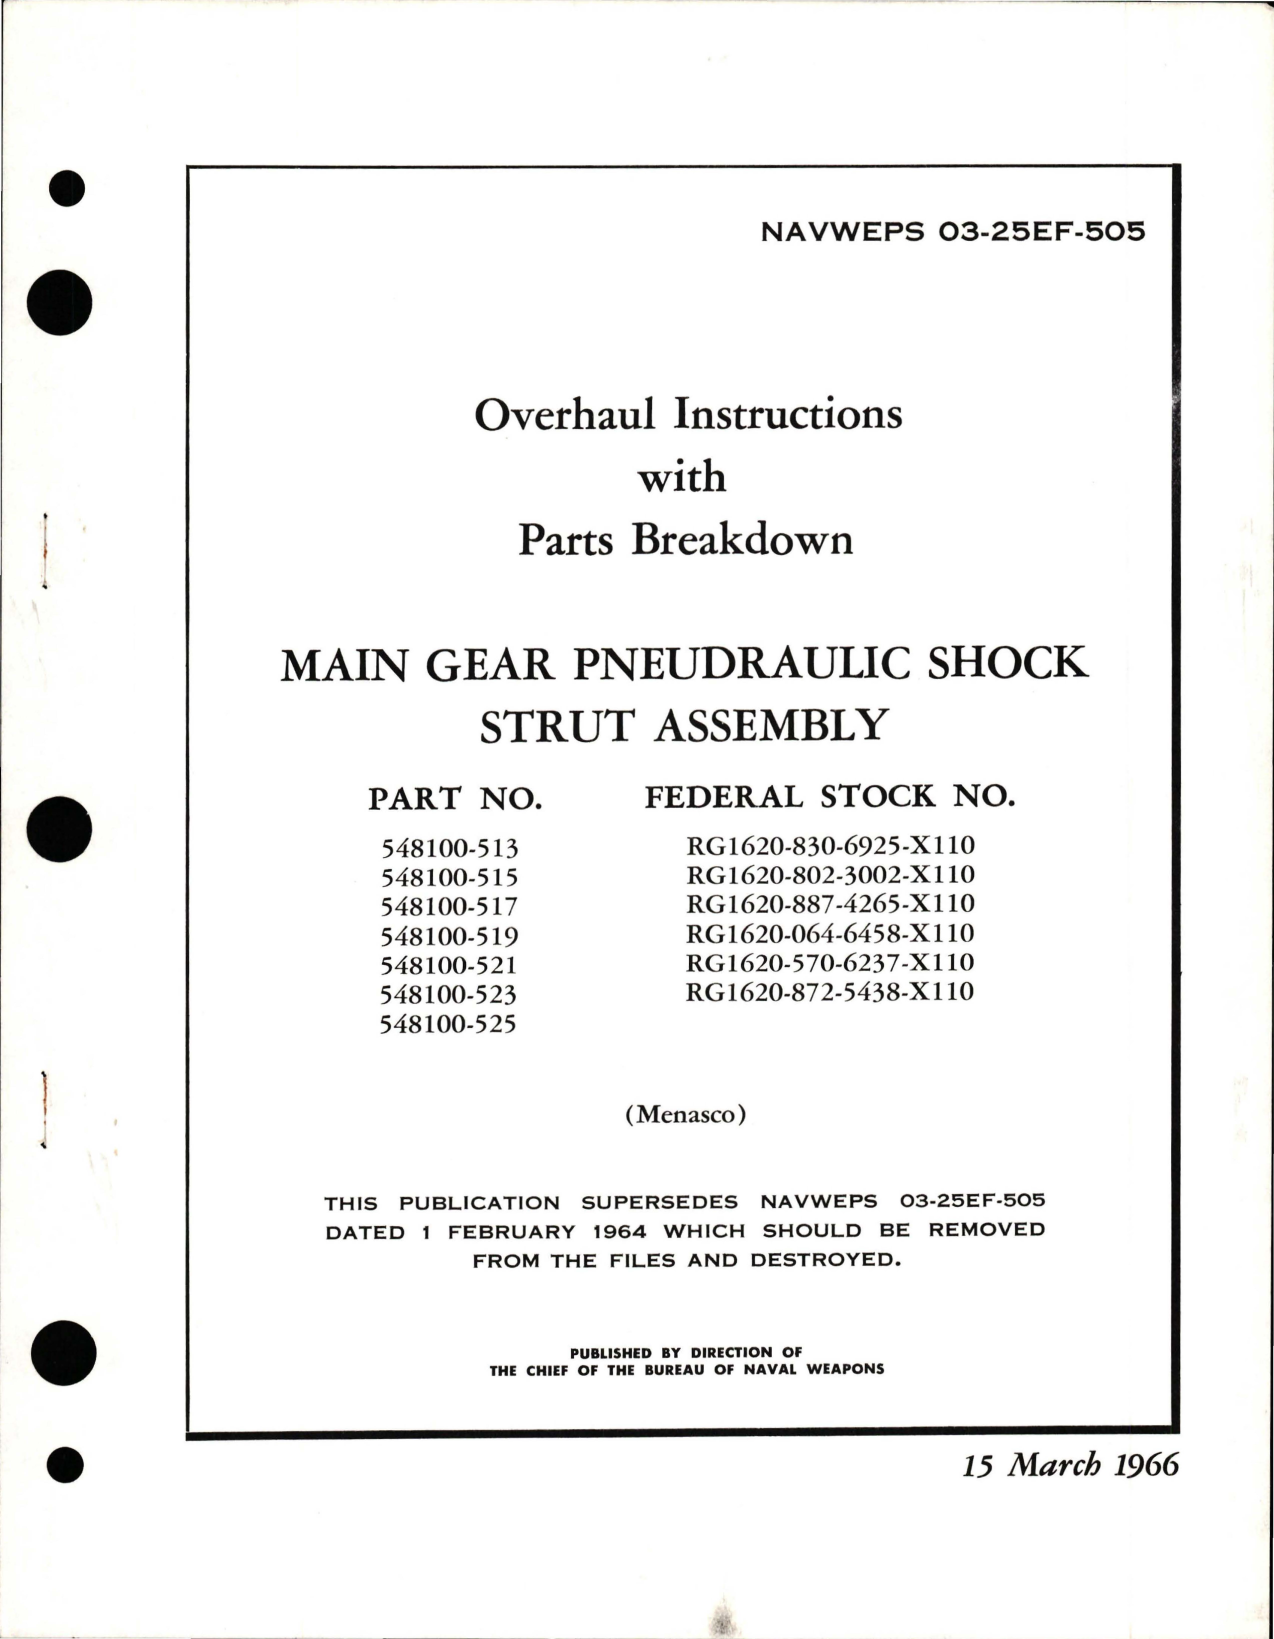 Sample page 1 from AirCorps Library document: Overhaul Instructions with Parts Breakdown for Main Gear Pneudraulic Shock Strut Assembly